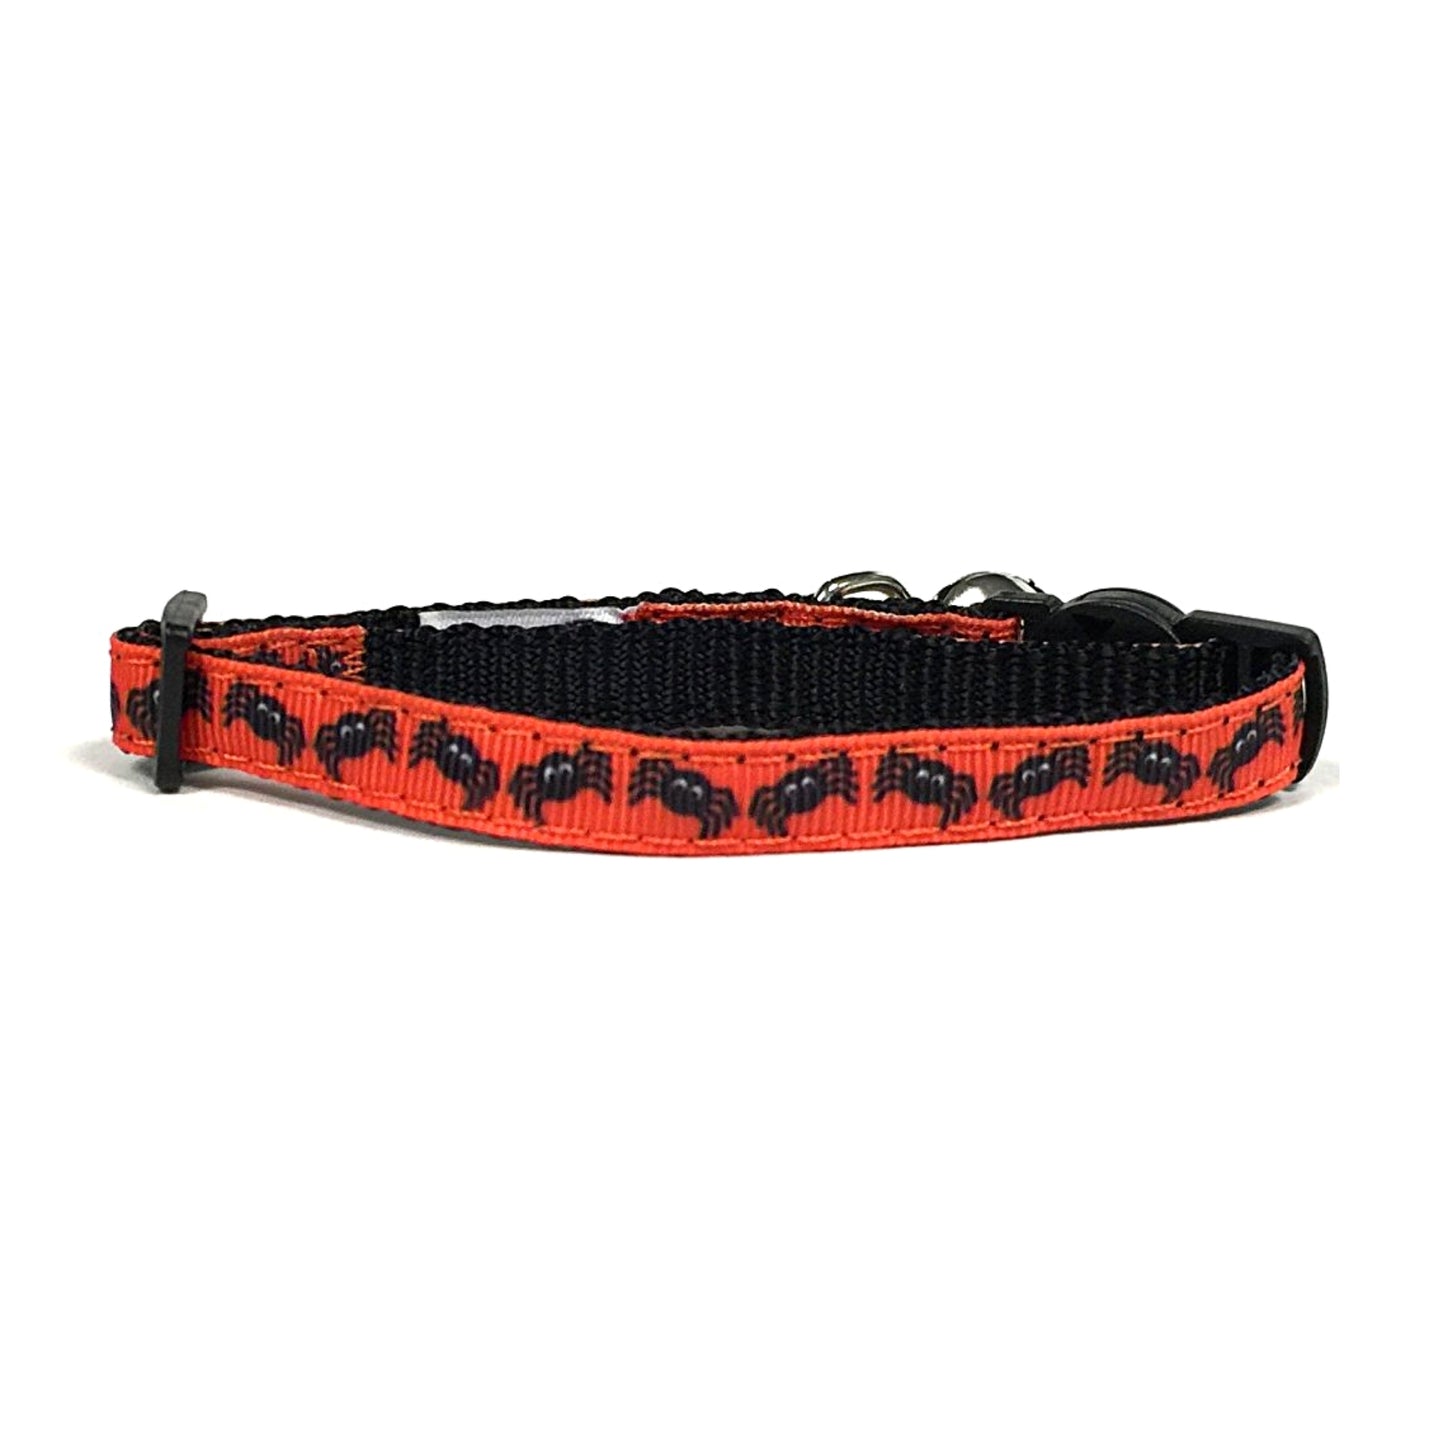 Midlee Halloween Spider Cat Collar Set with Safety Buckle